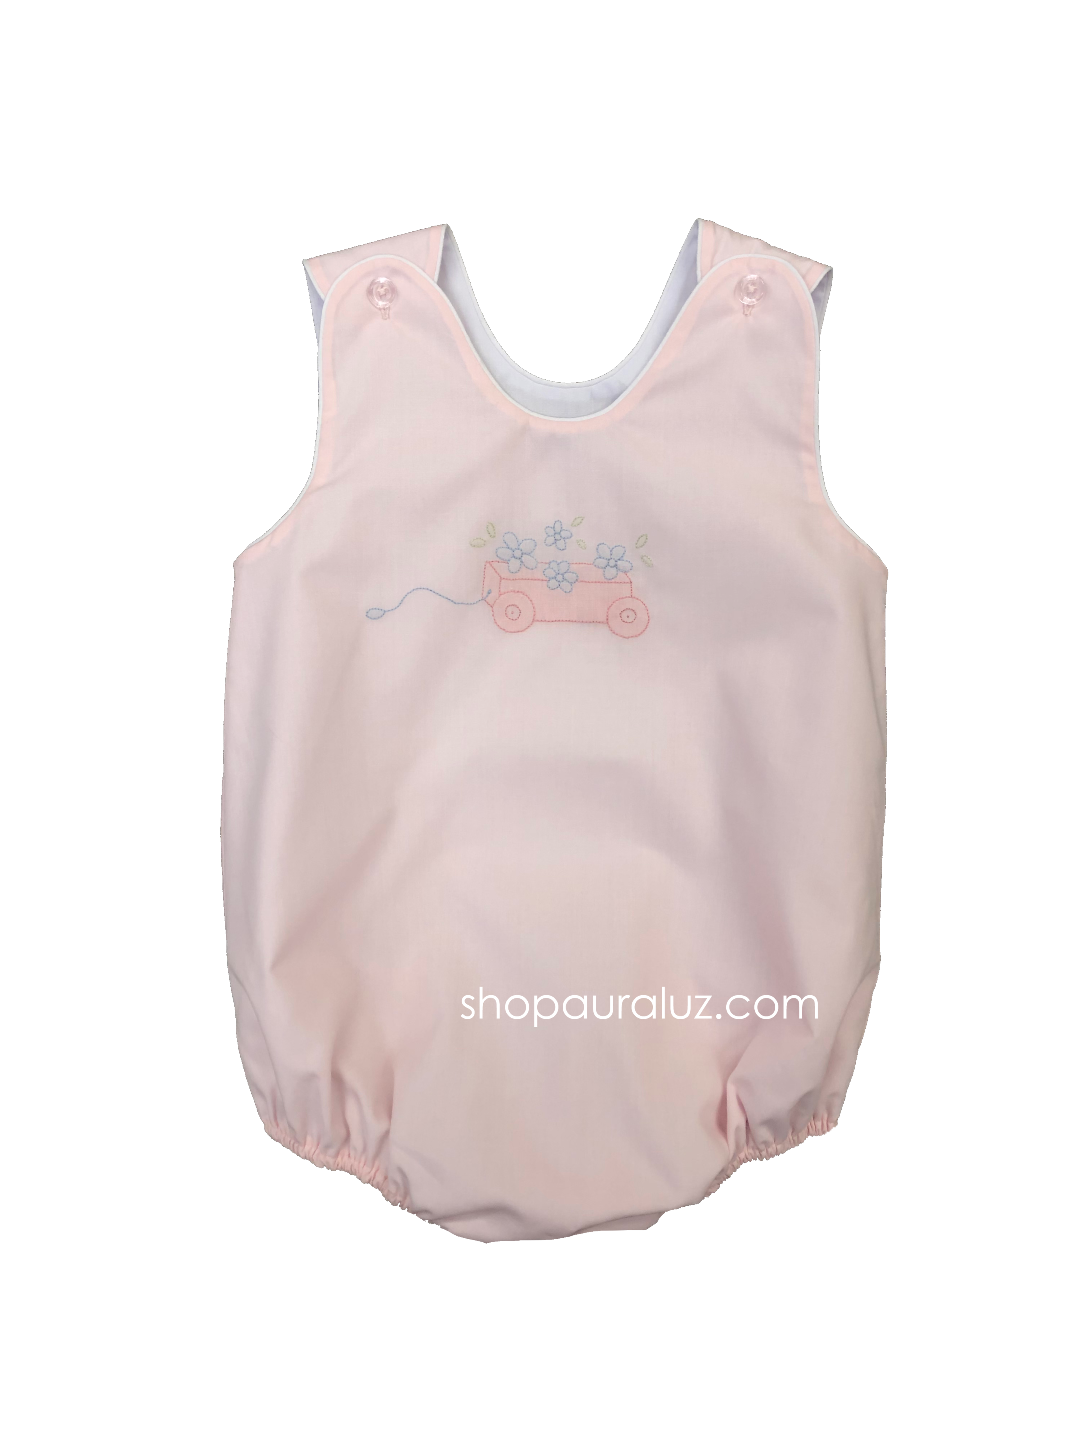 Auraluz Sleeveless Bubble..Pink with white binding and embroidered wagon w/flowers